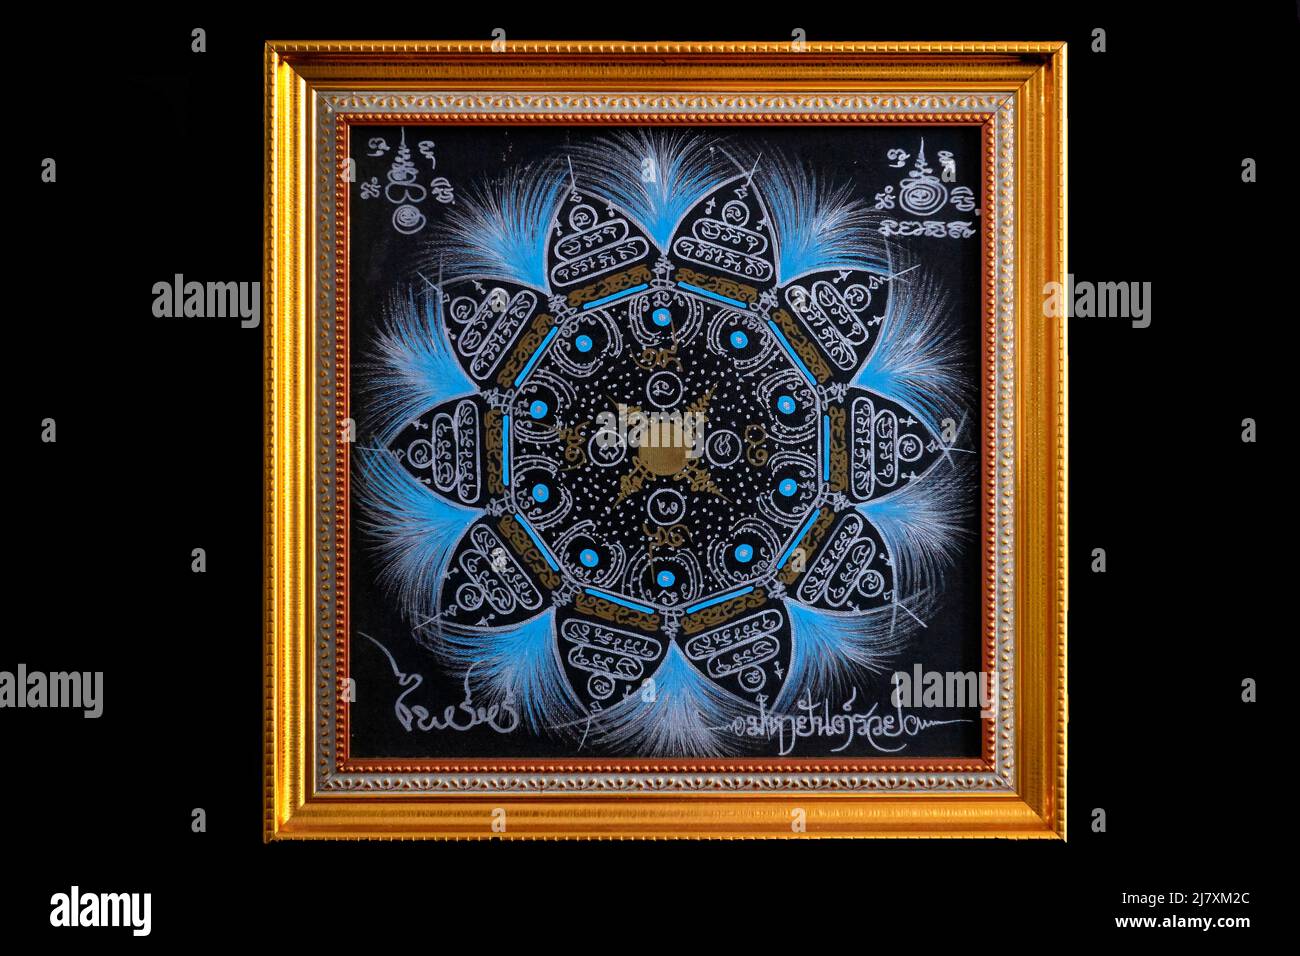 Mandala dot art painting with Thailand graphics and insignia Stock Photo